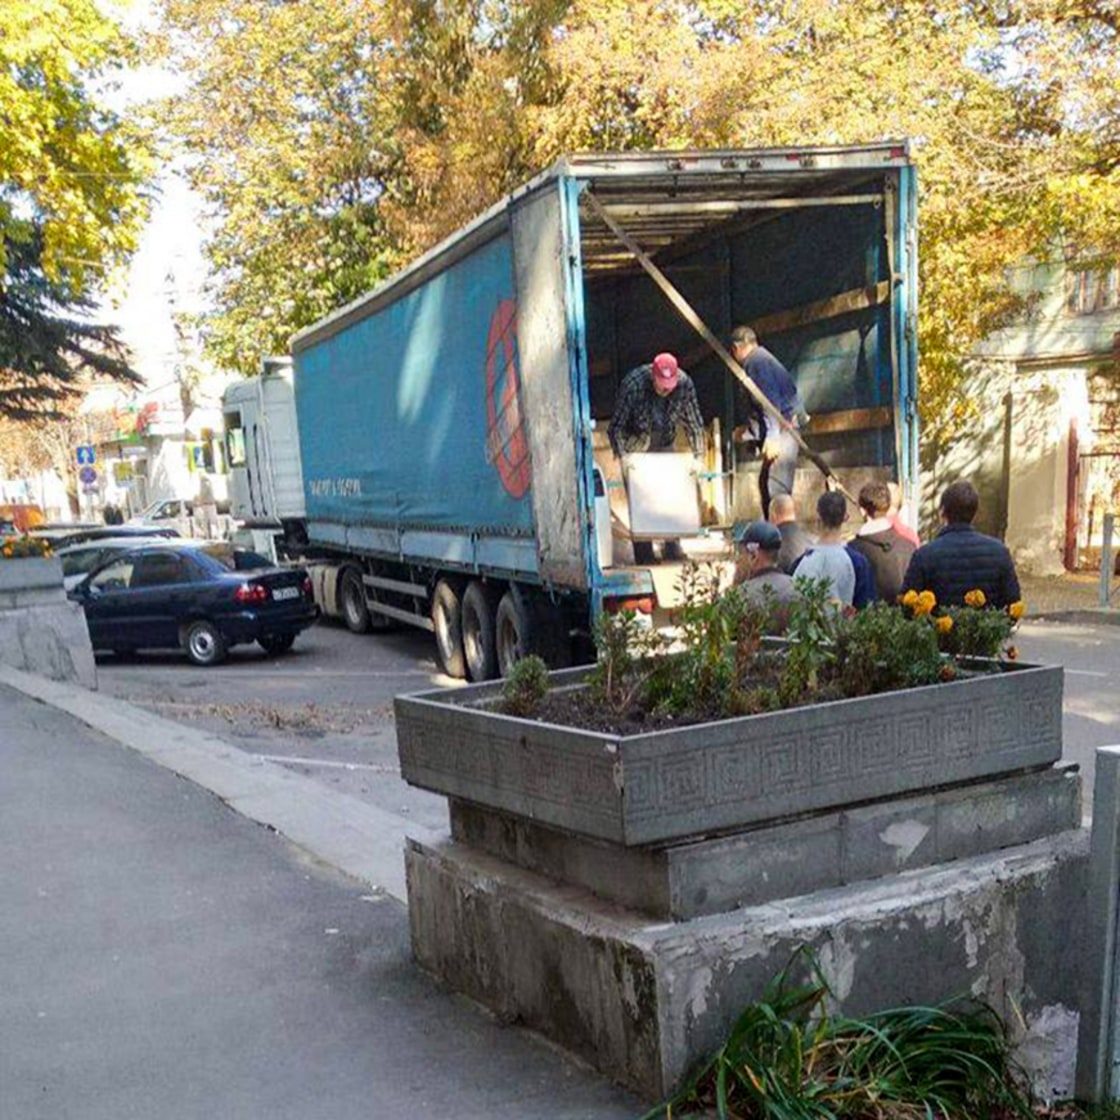 Russians in plainclothes load stolen artwork from the Kherson Regional Art Museum into the back of a truck in November. Courtesy Kherson Regional Art Museum